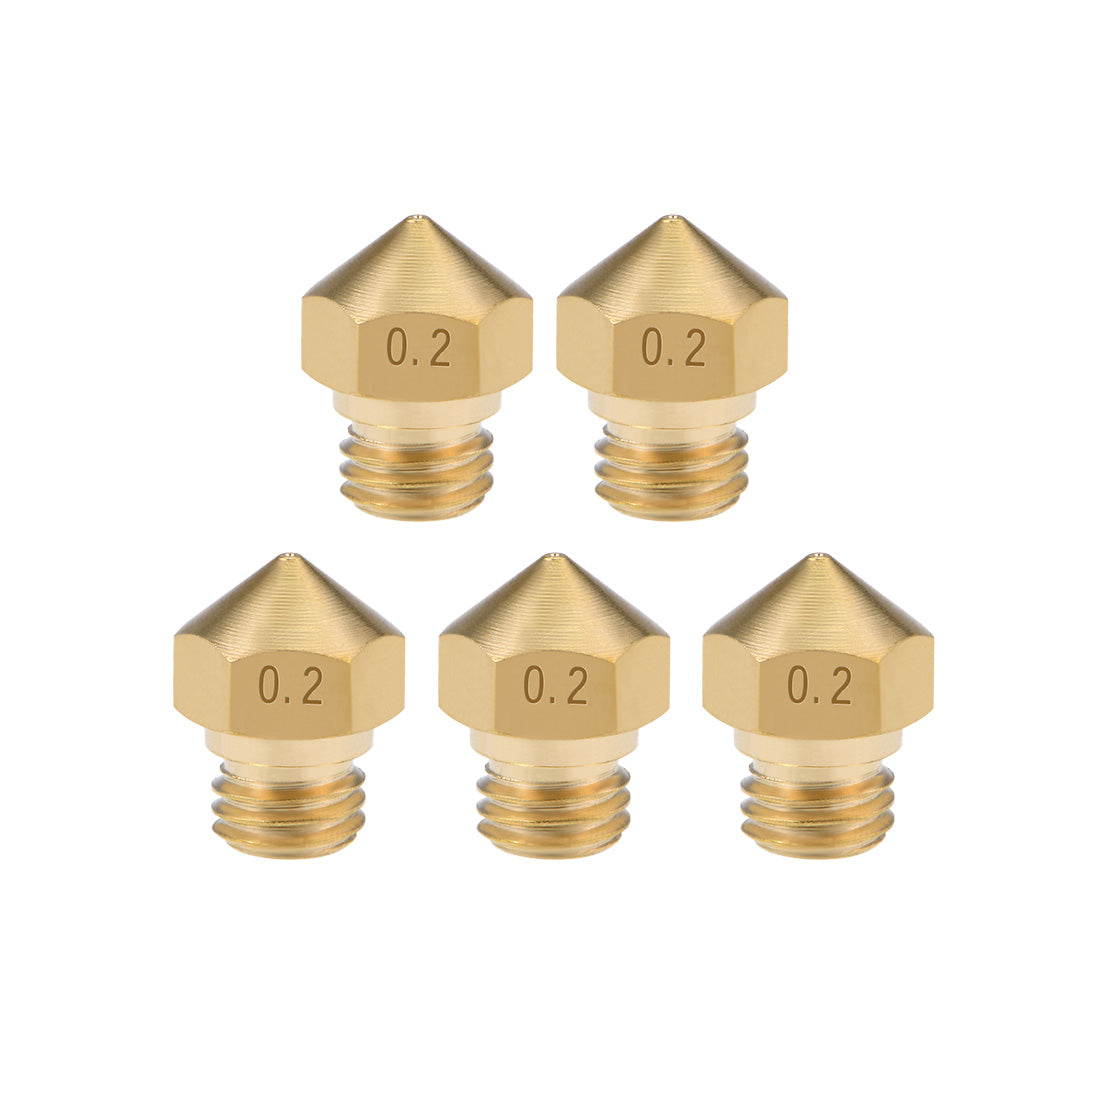 uxcell Uxcell 0.2mm 3D Printer Nozzle Head M7 Thread Replacement for MK10 1.75mm Extruder Print, Brass 5pcs